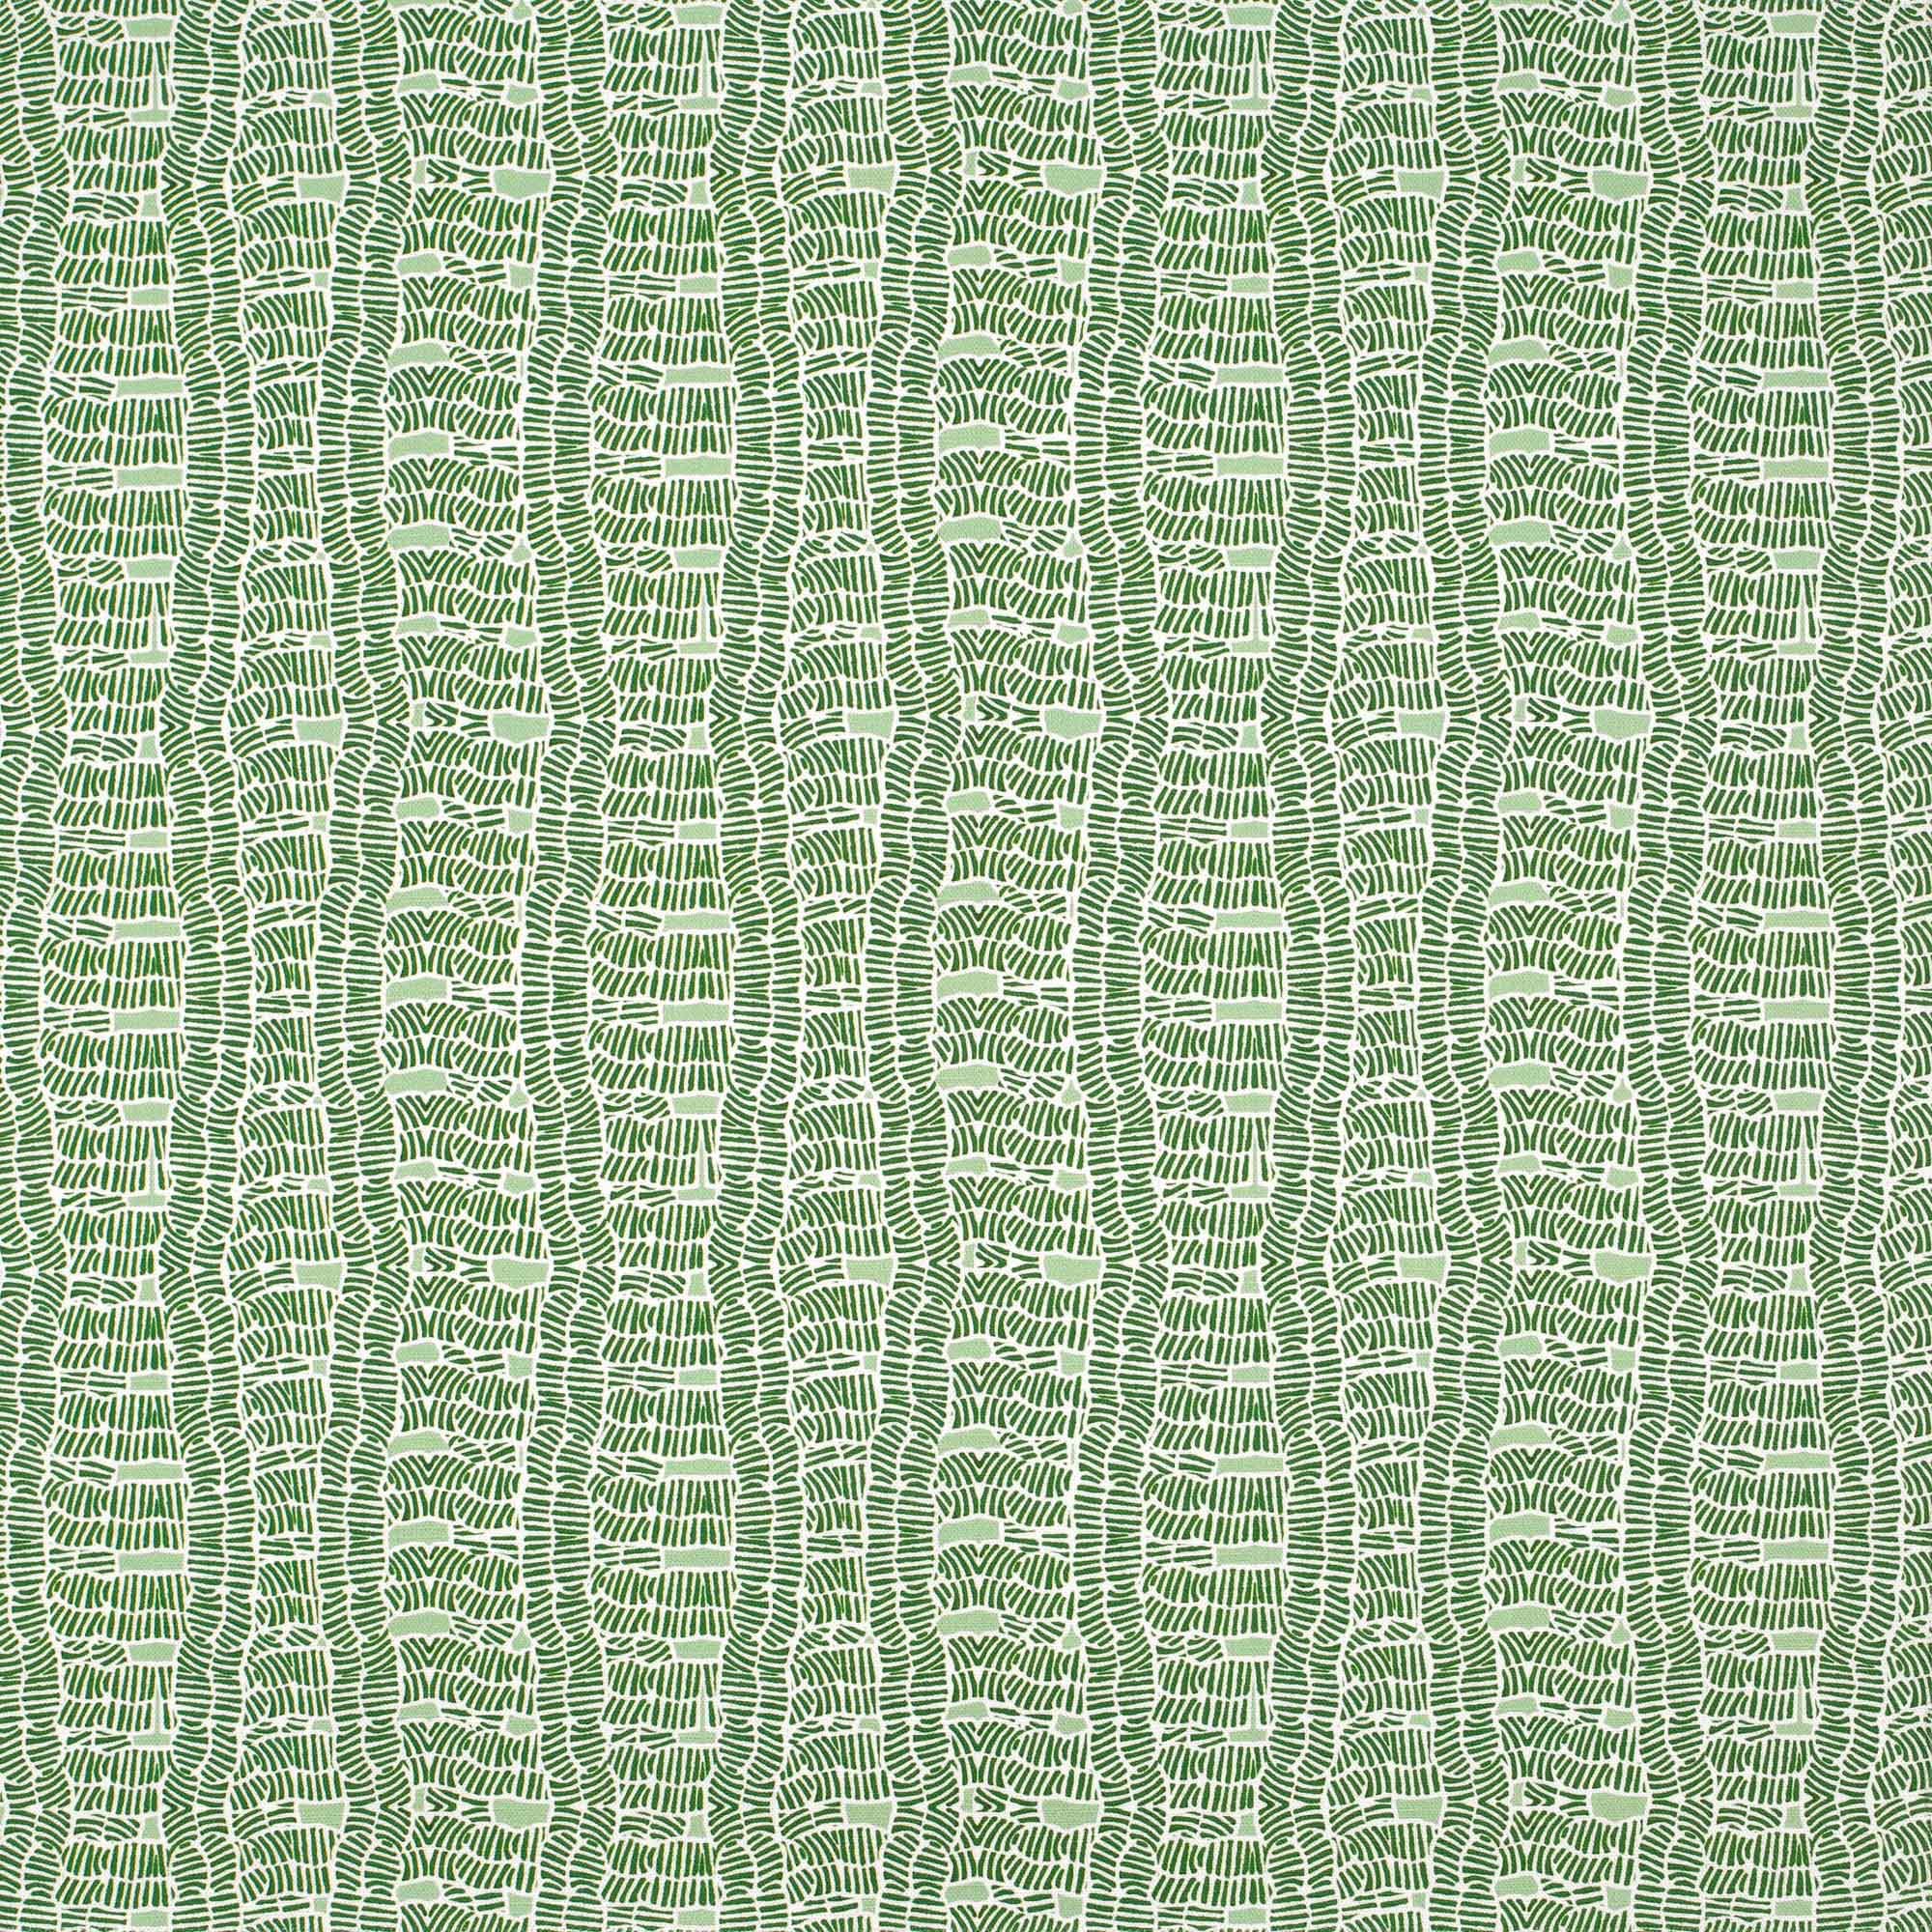 Detail of fabric in a playful curvy grid print in green on a white field.